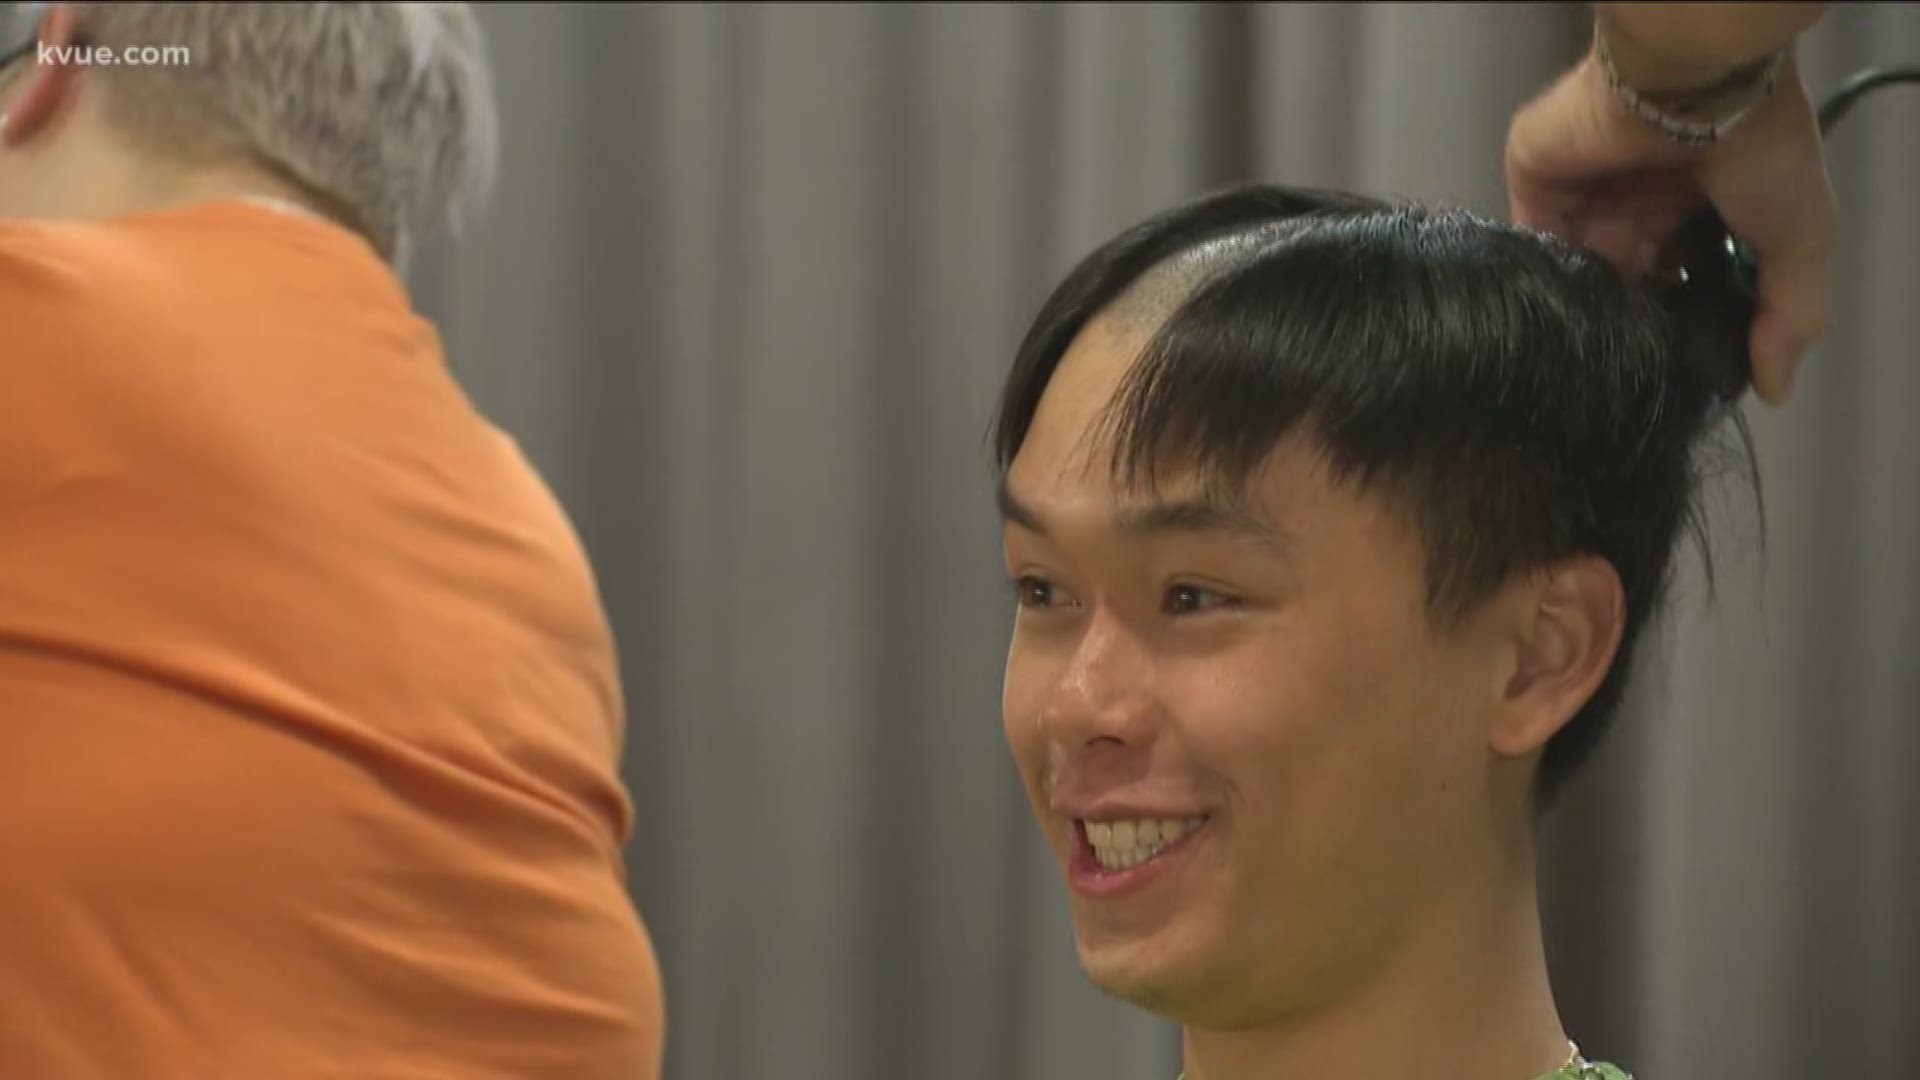 On Saturday dozens of UT students shaved their heads for a good cause.